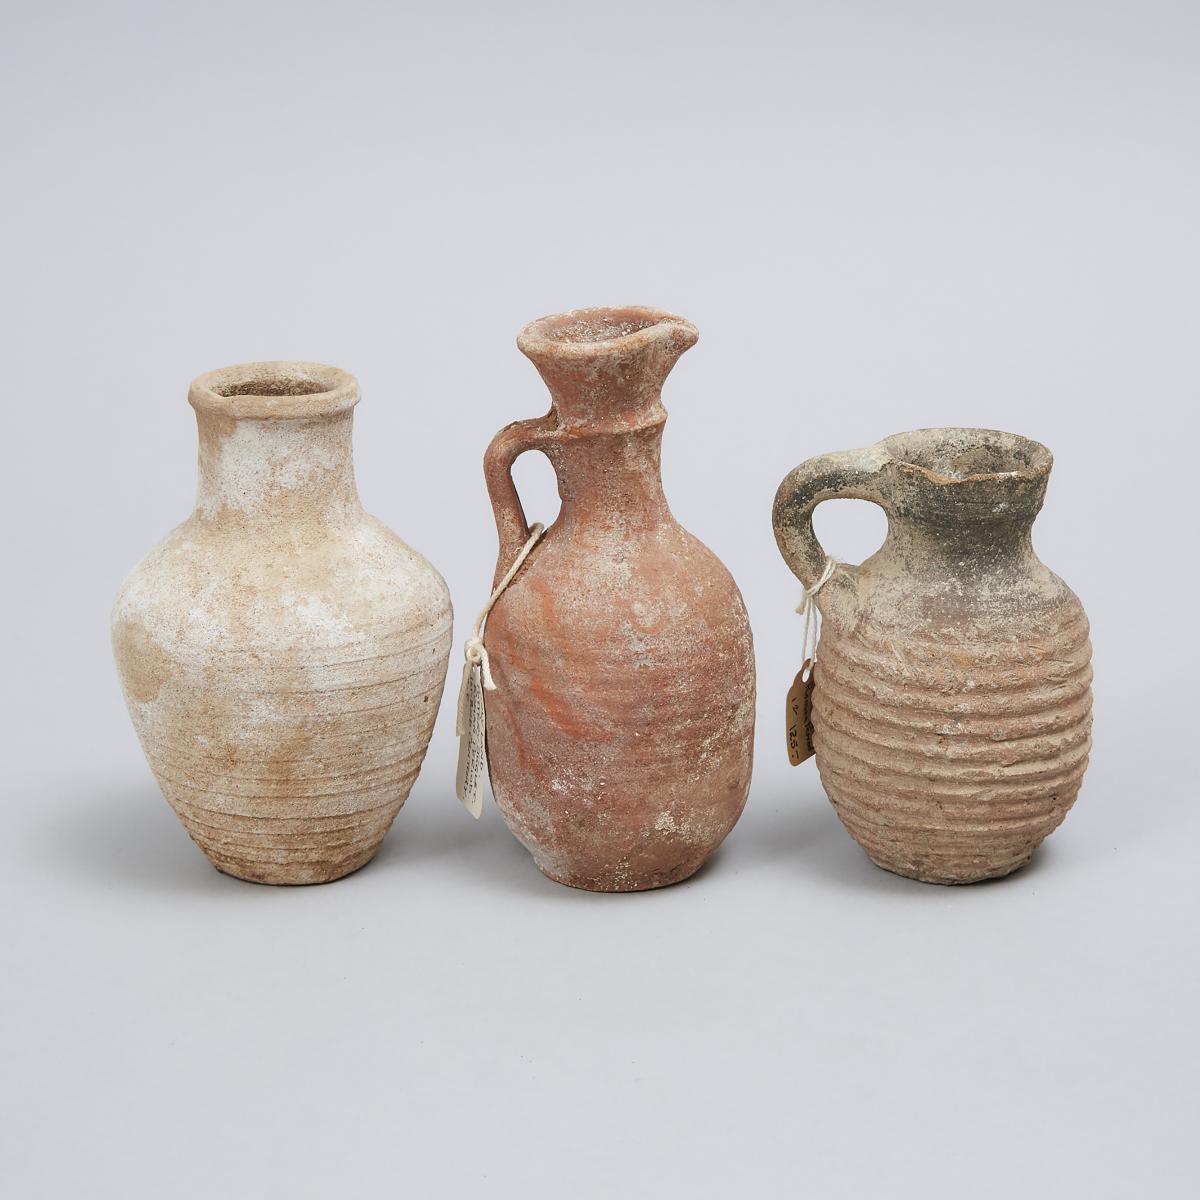 Three Pieces Roman Period Levantine-Holy Land Pottery Ribbed Pottery, 100-200 A.D., various sizes, t - Image 2 of 2